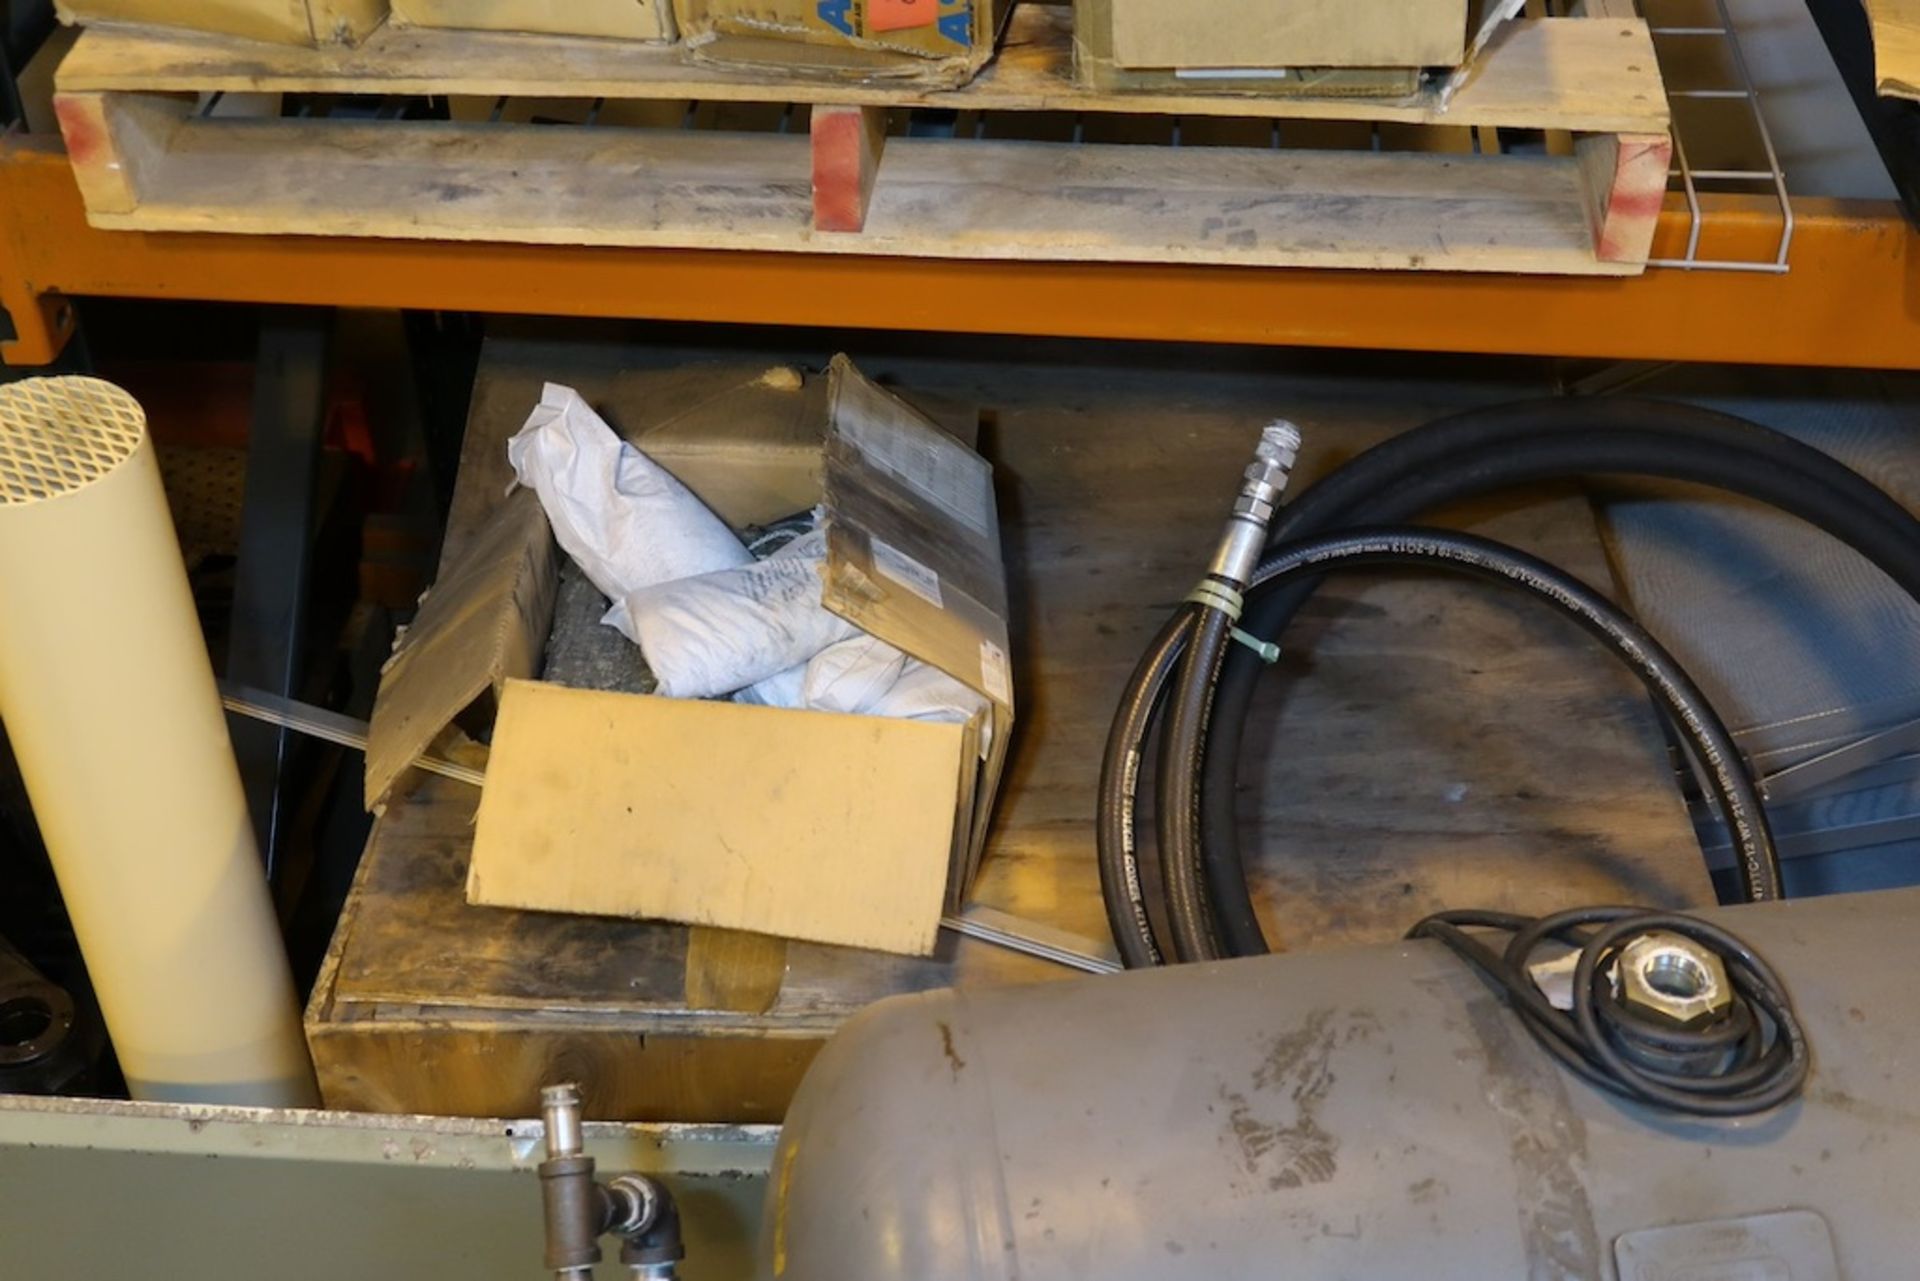 Contents of (1) Sections of Pallet Racking, Including Misc. Machine Parts, Blower, Etc. - Image 6 of 8